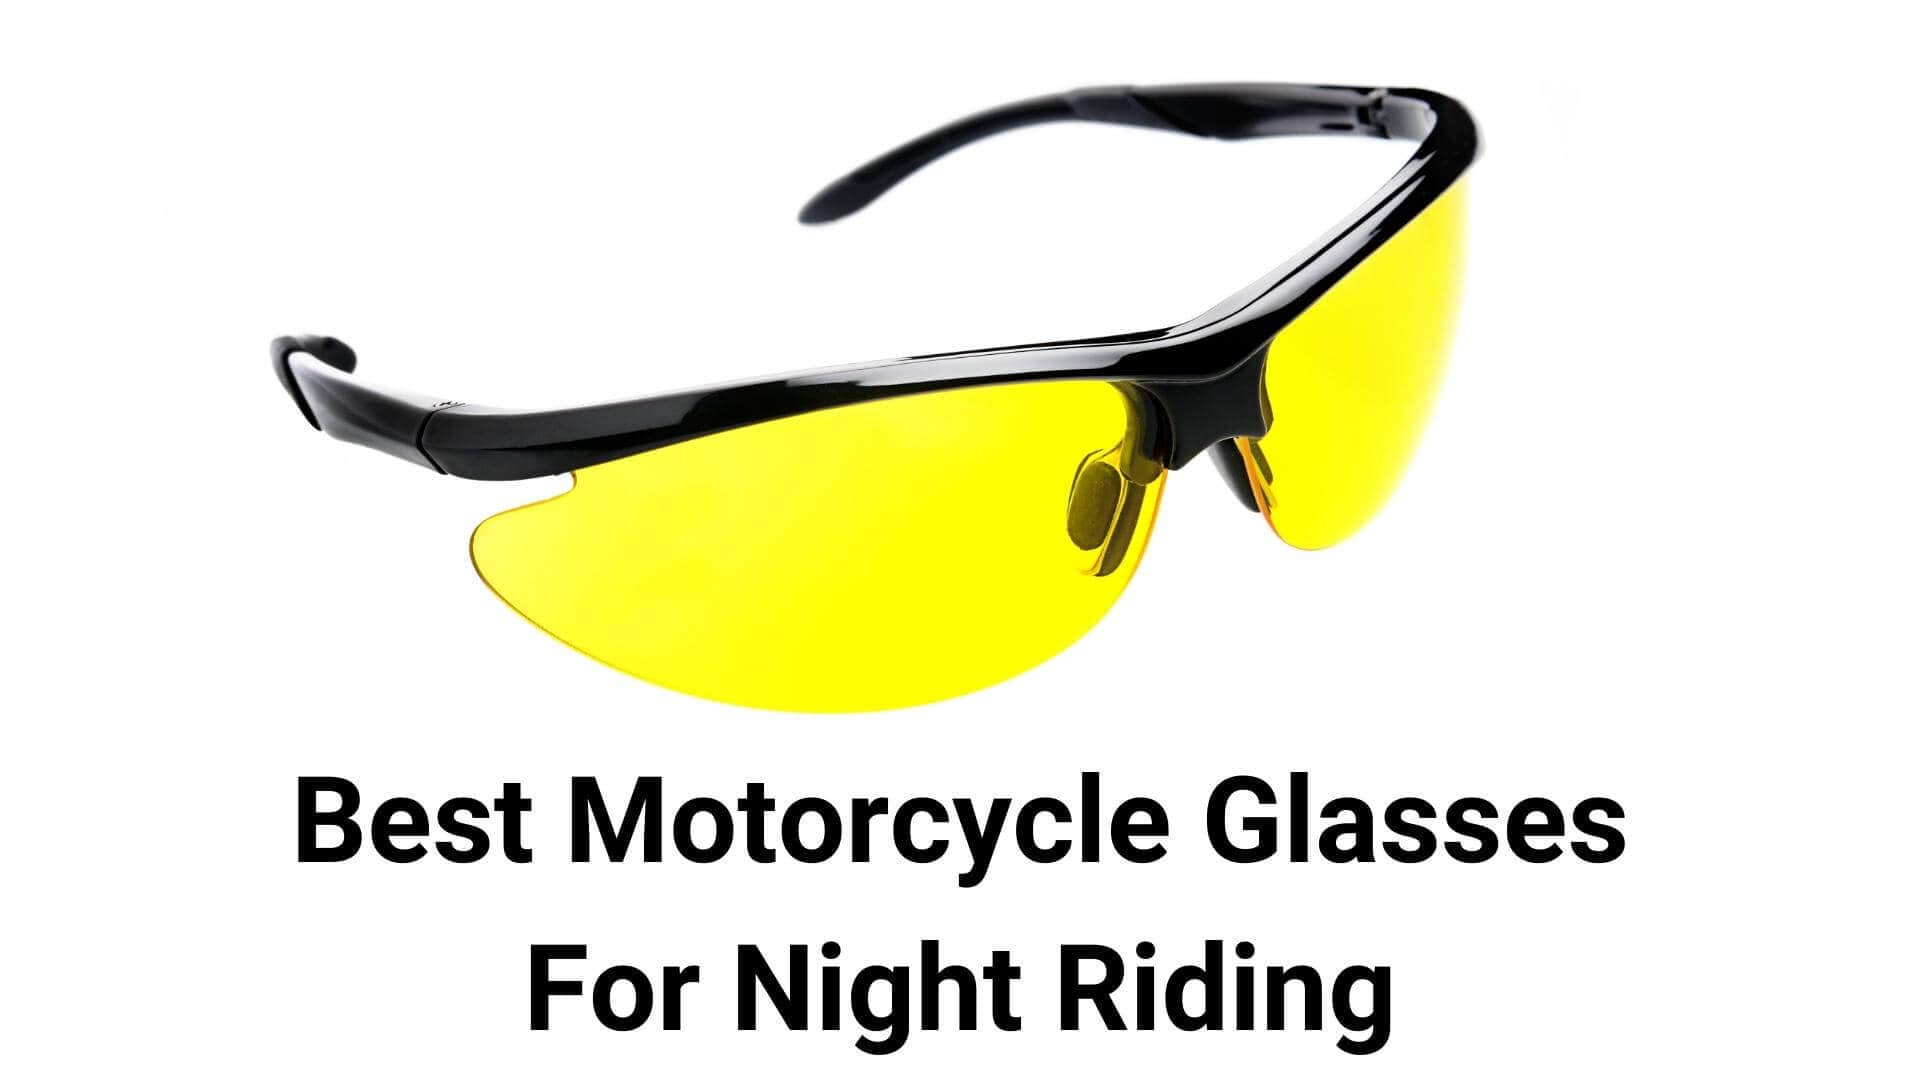 10 Best Motorcycle Glasses For Night Riding!